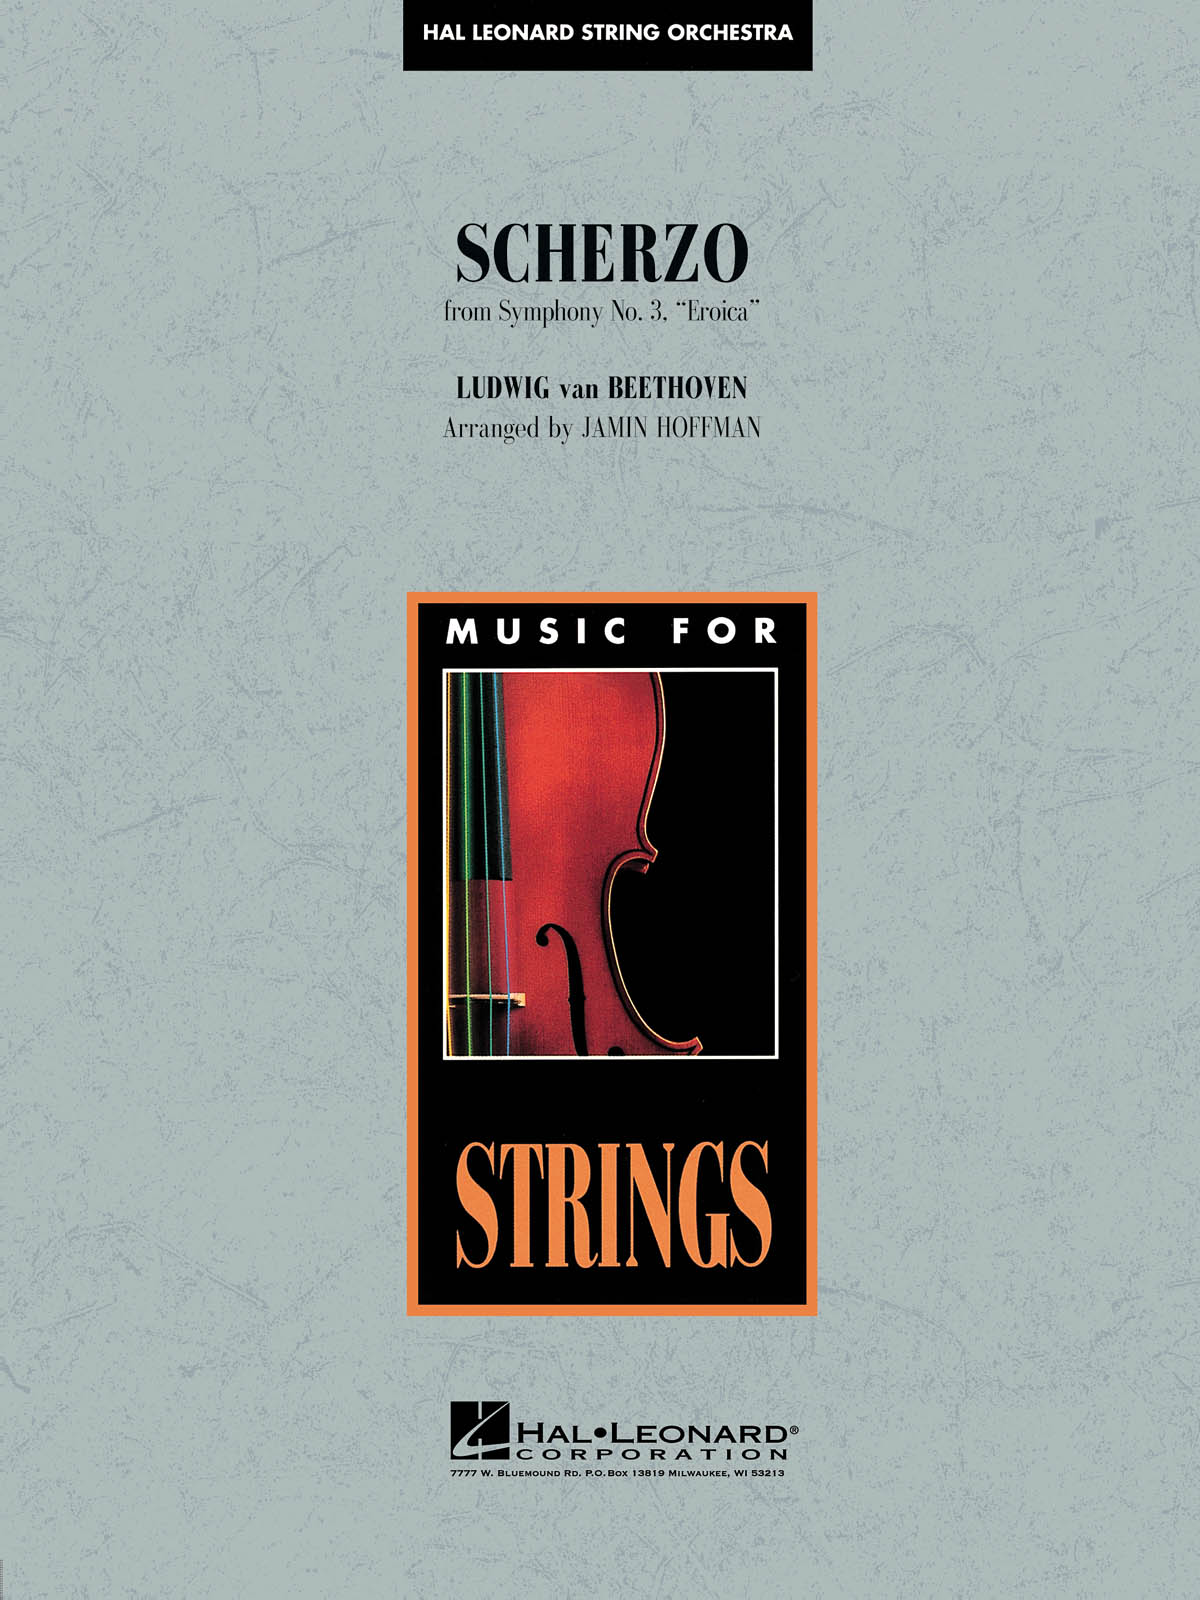 Ludwig van Beethoven: Scherzo from Symphony No. 3 - Eroica: String Orchestra: